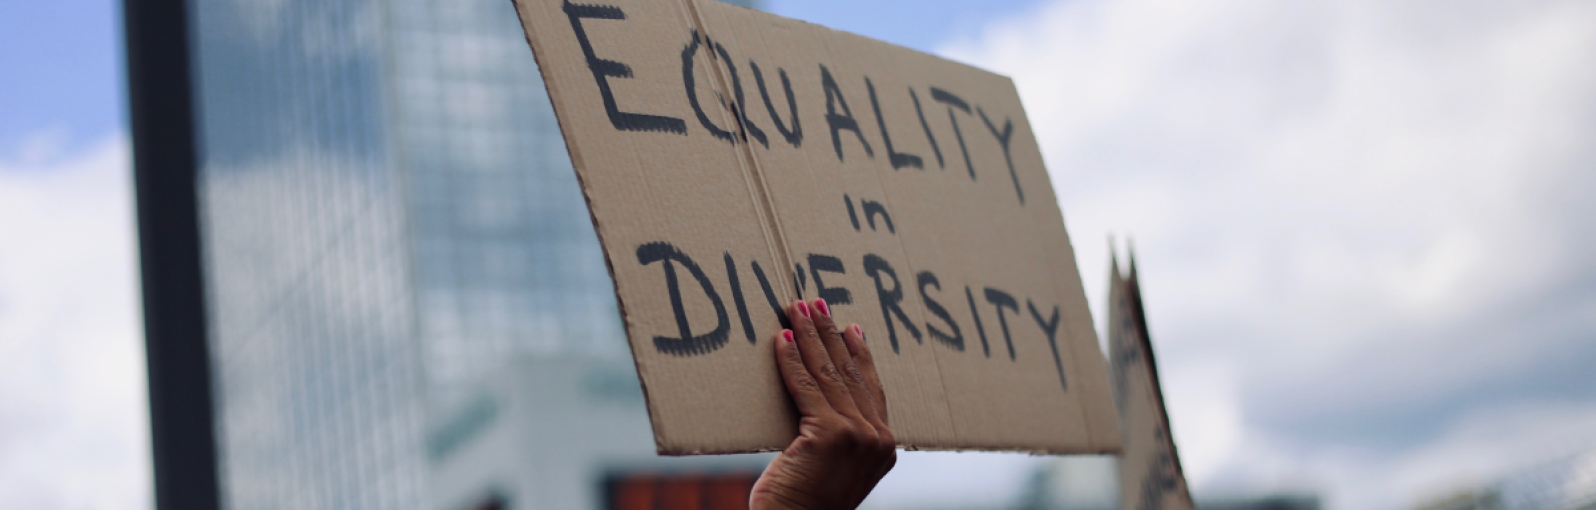 A protest for equality in diversity